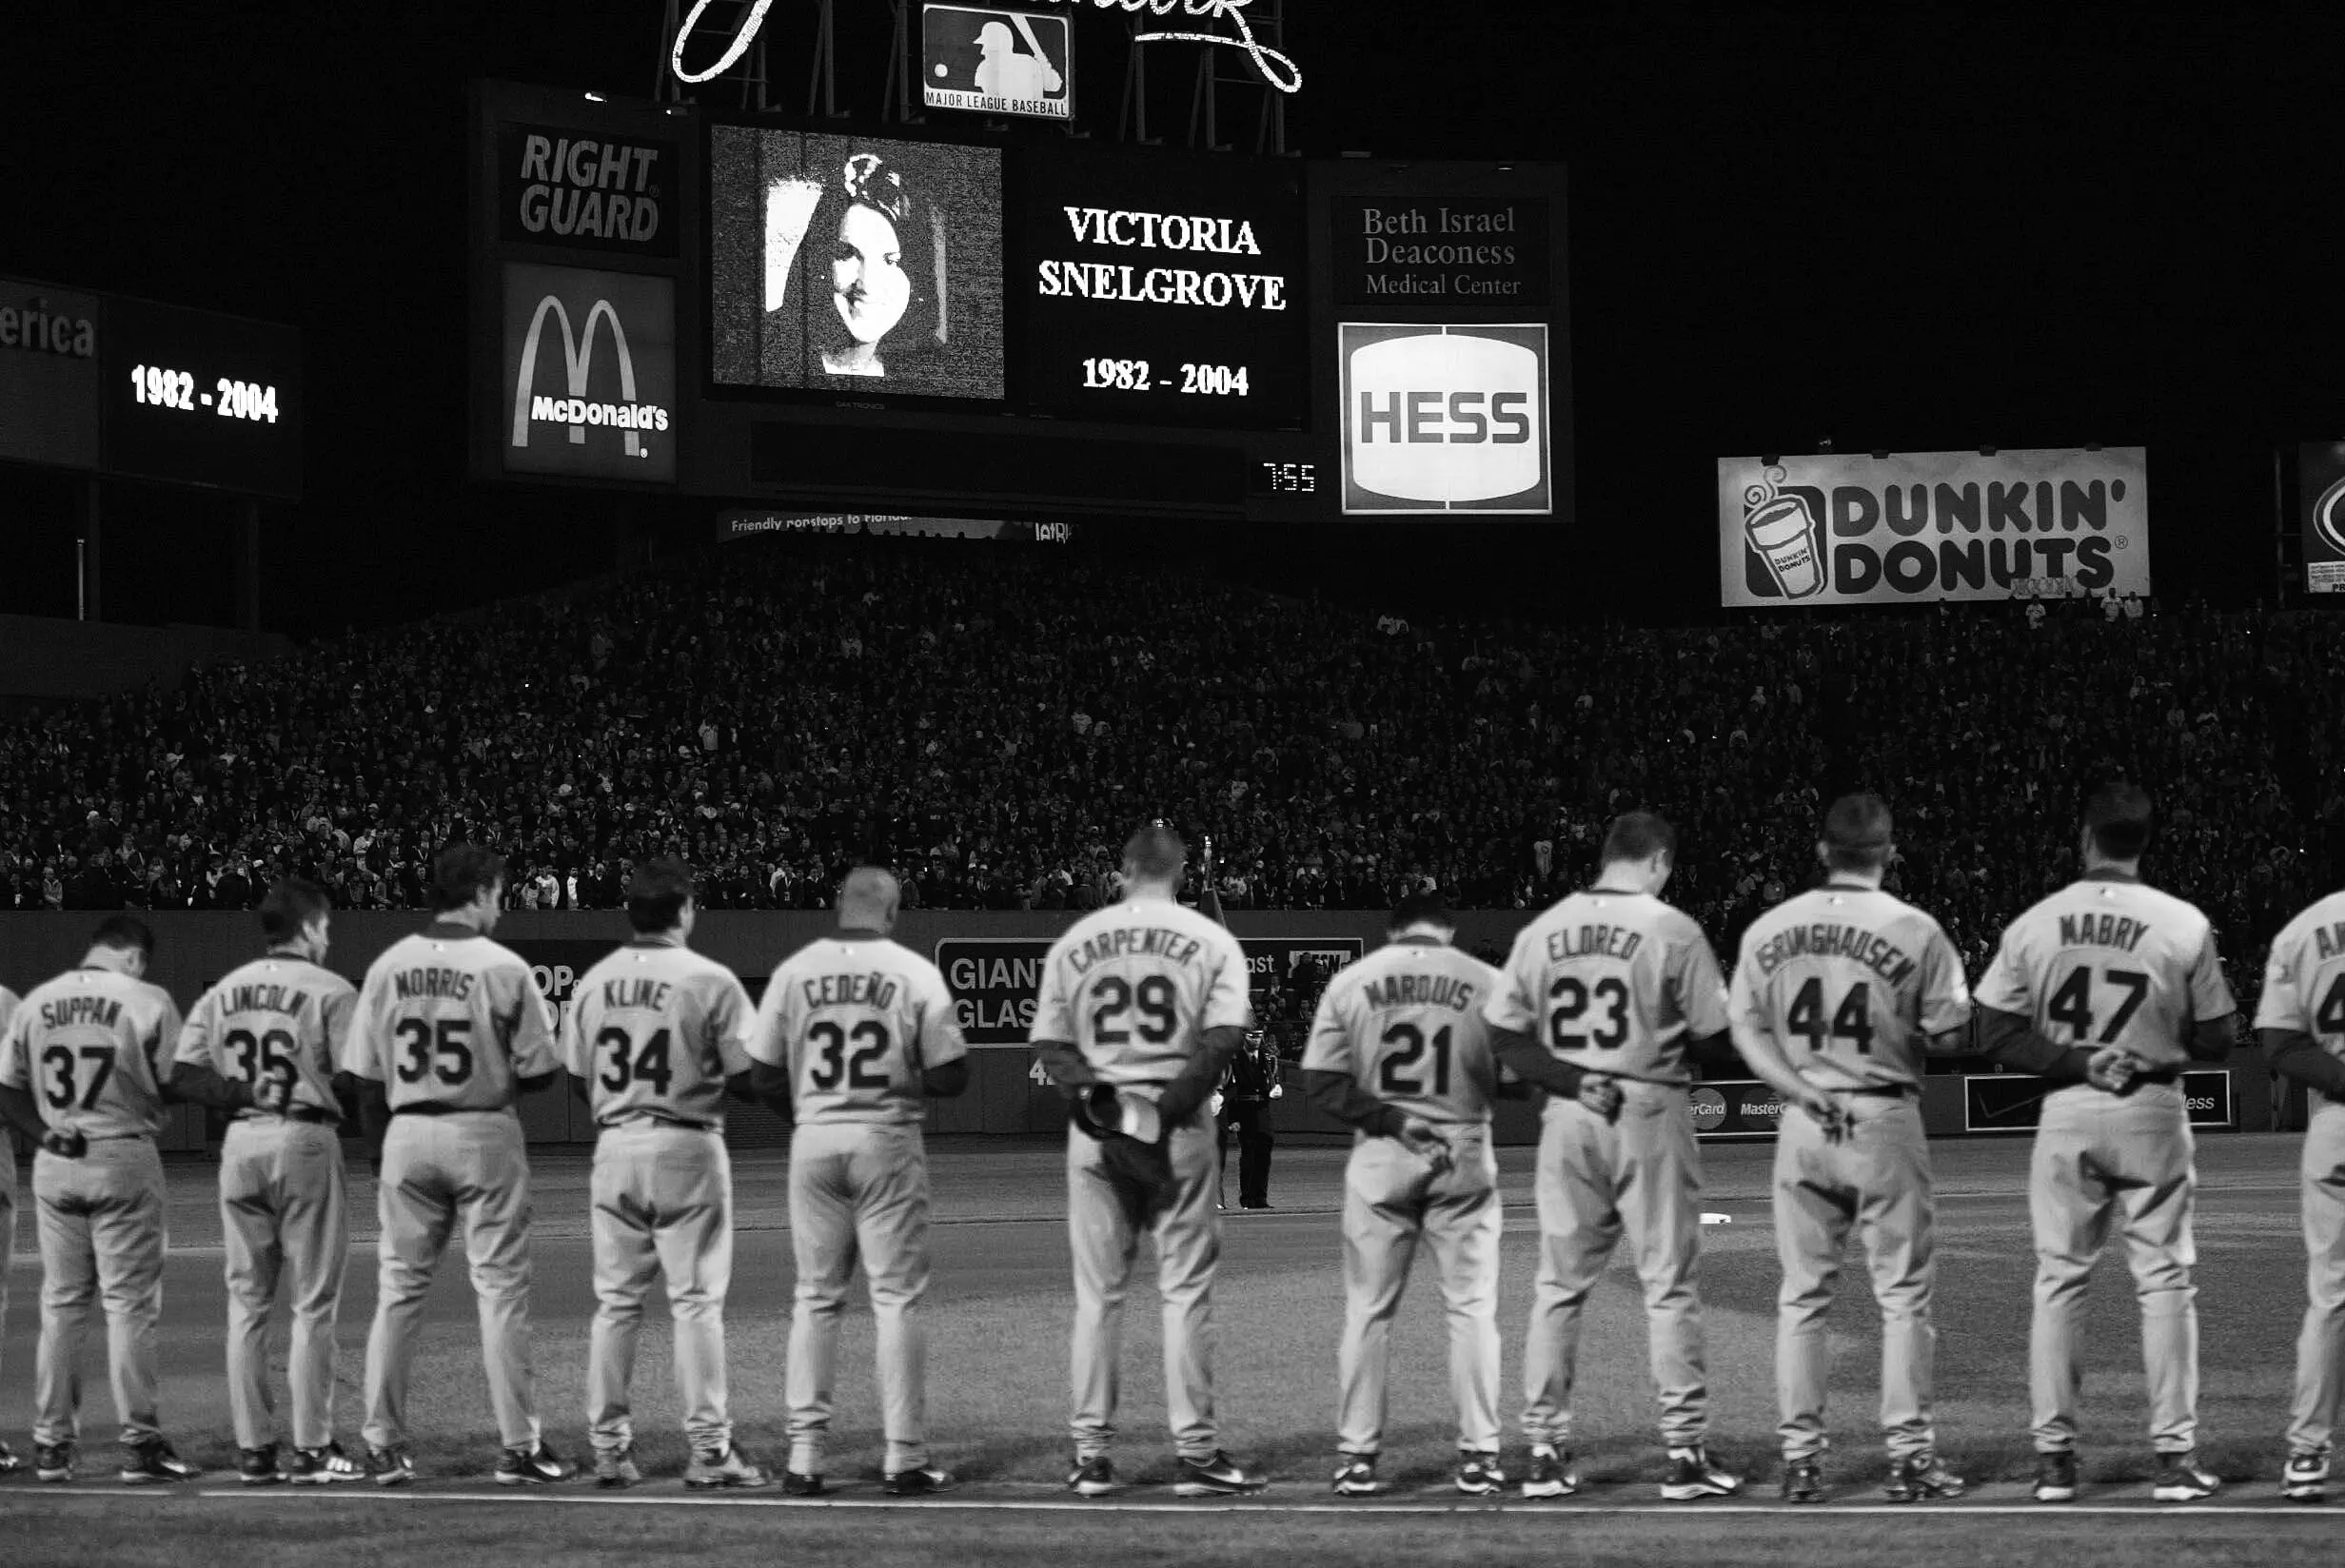 Fenway Park observes a moment of silence for Victoria Snelgrove before the start of Game 1 of the 2004 World Series on October 23, 2004.